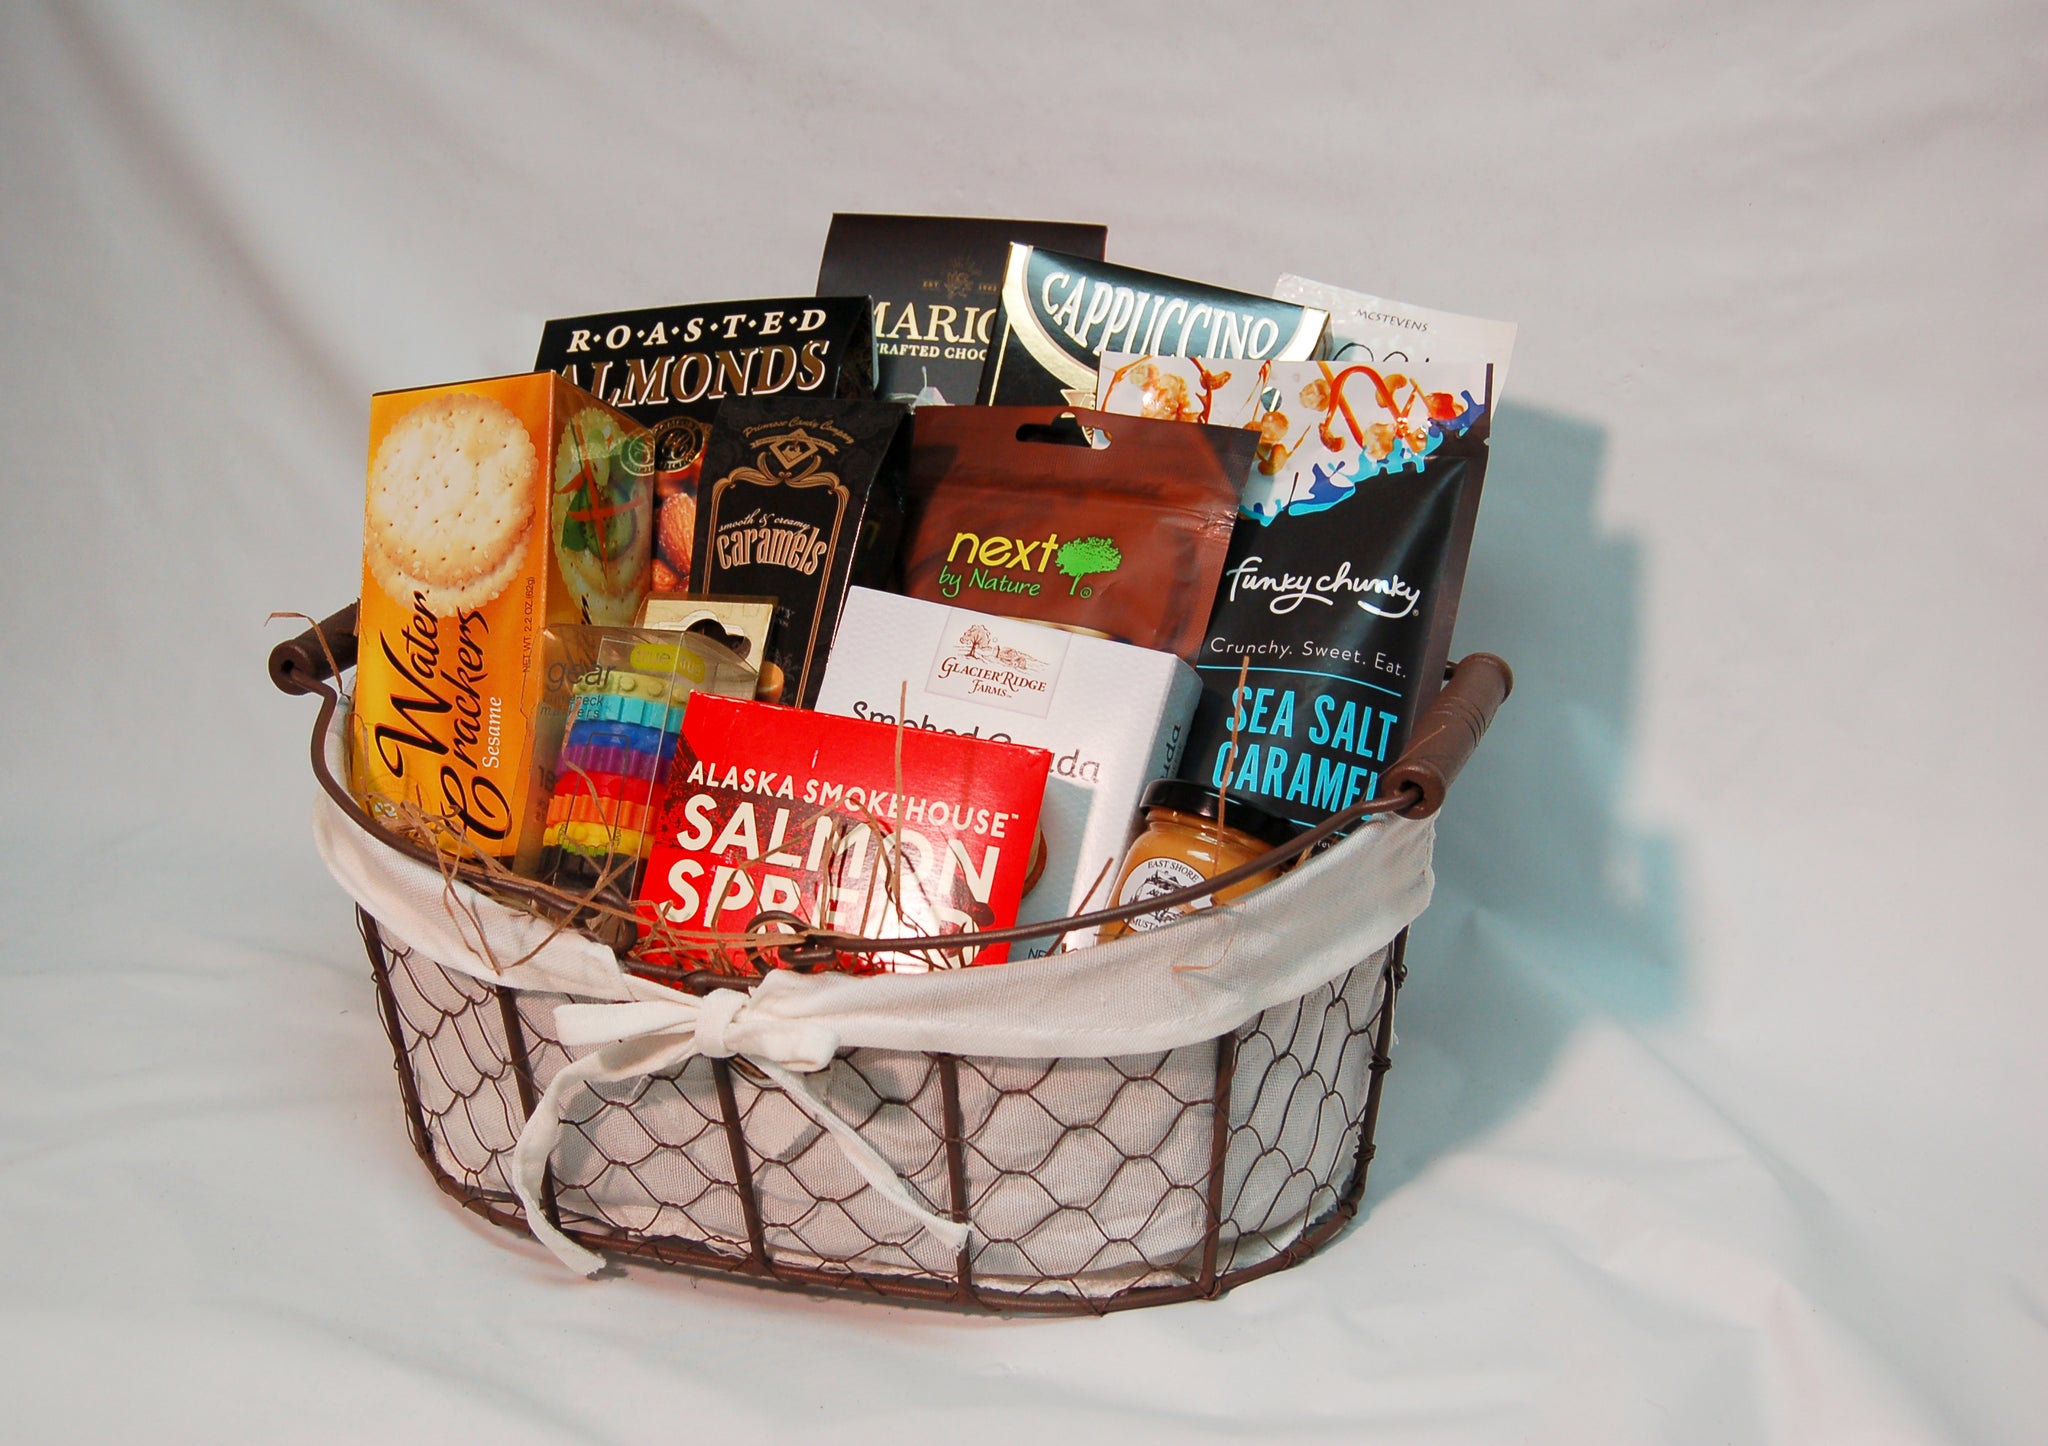 The Productivity Gift Basket